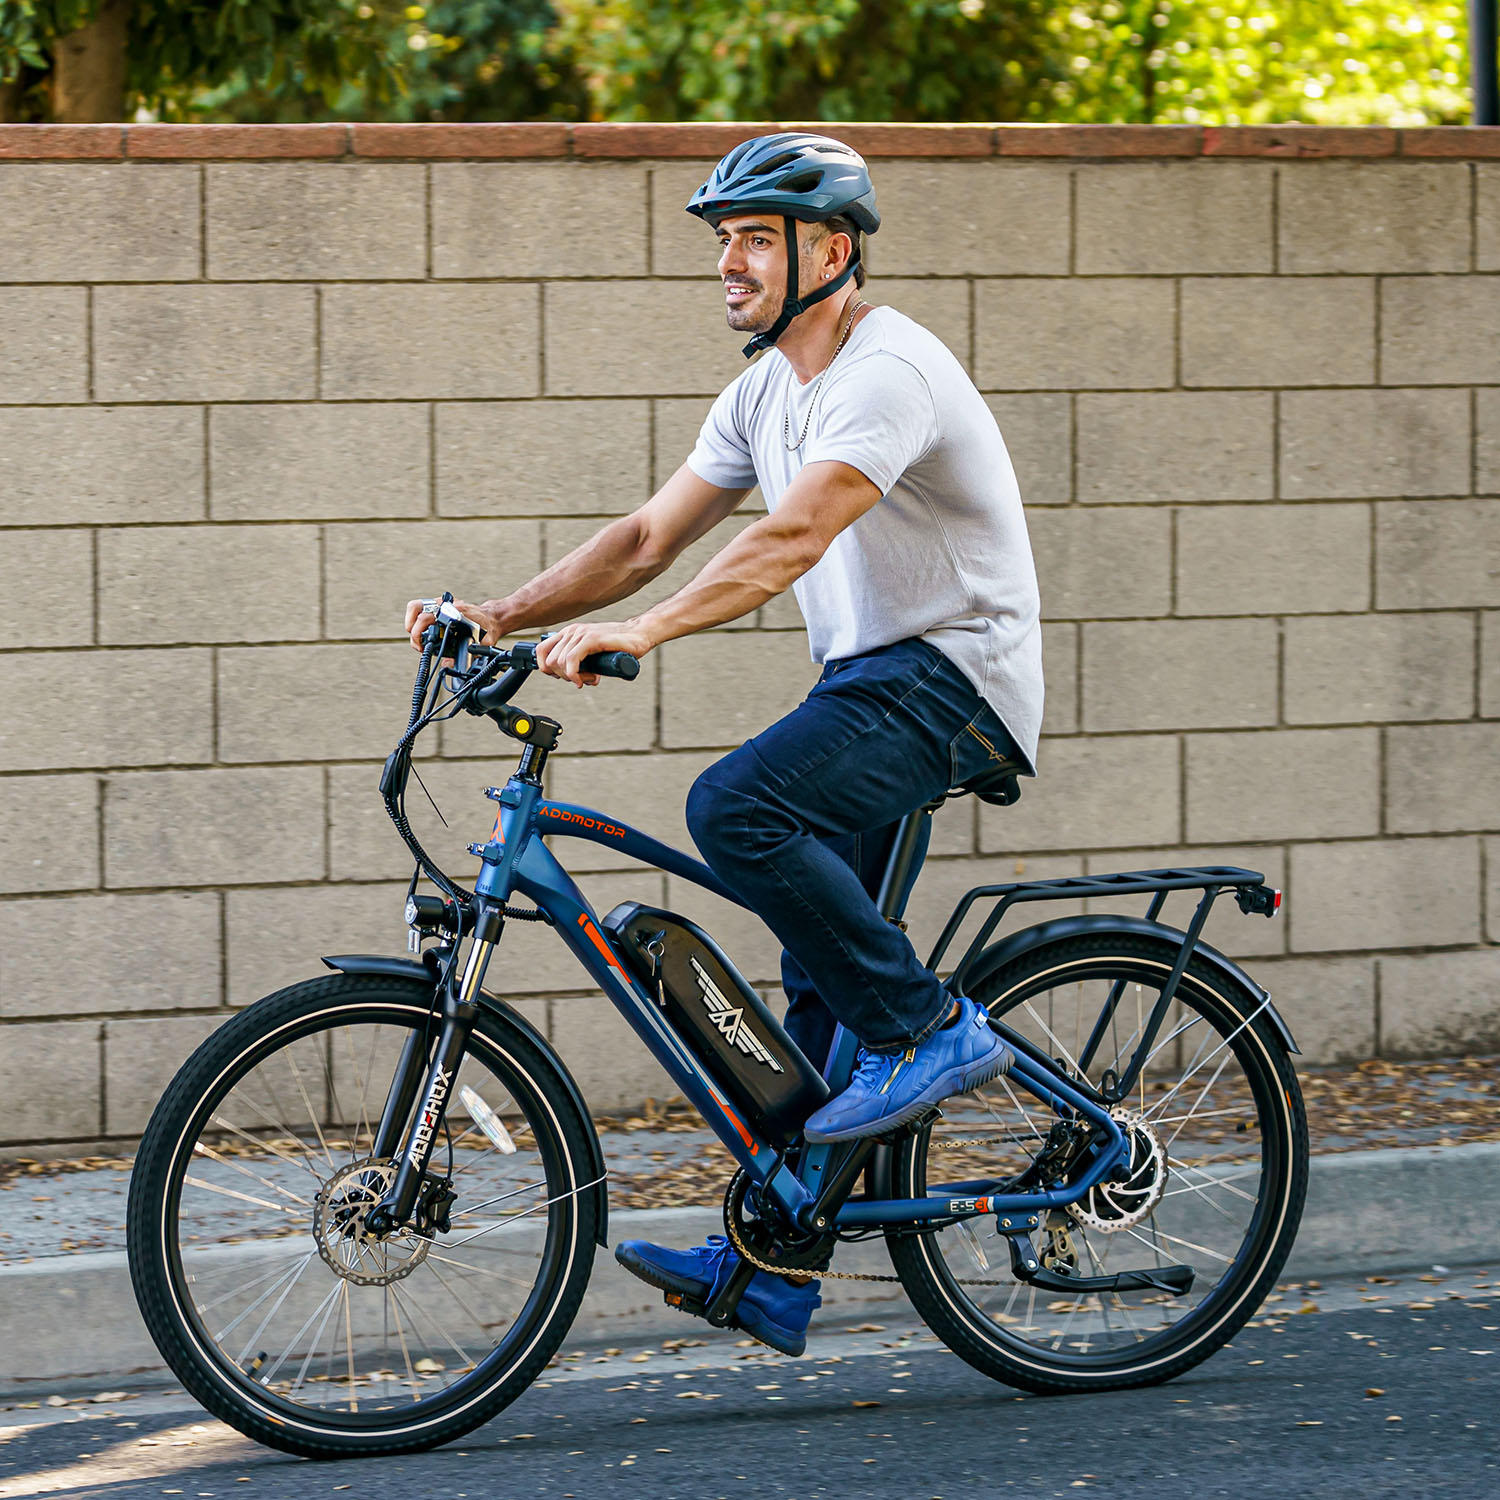 U.S. Electric Bicycle Laws and Safety Tips